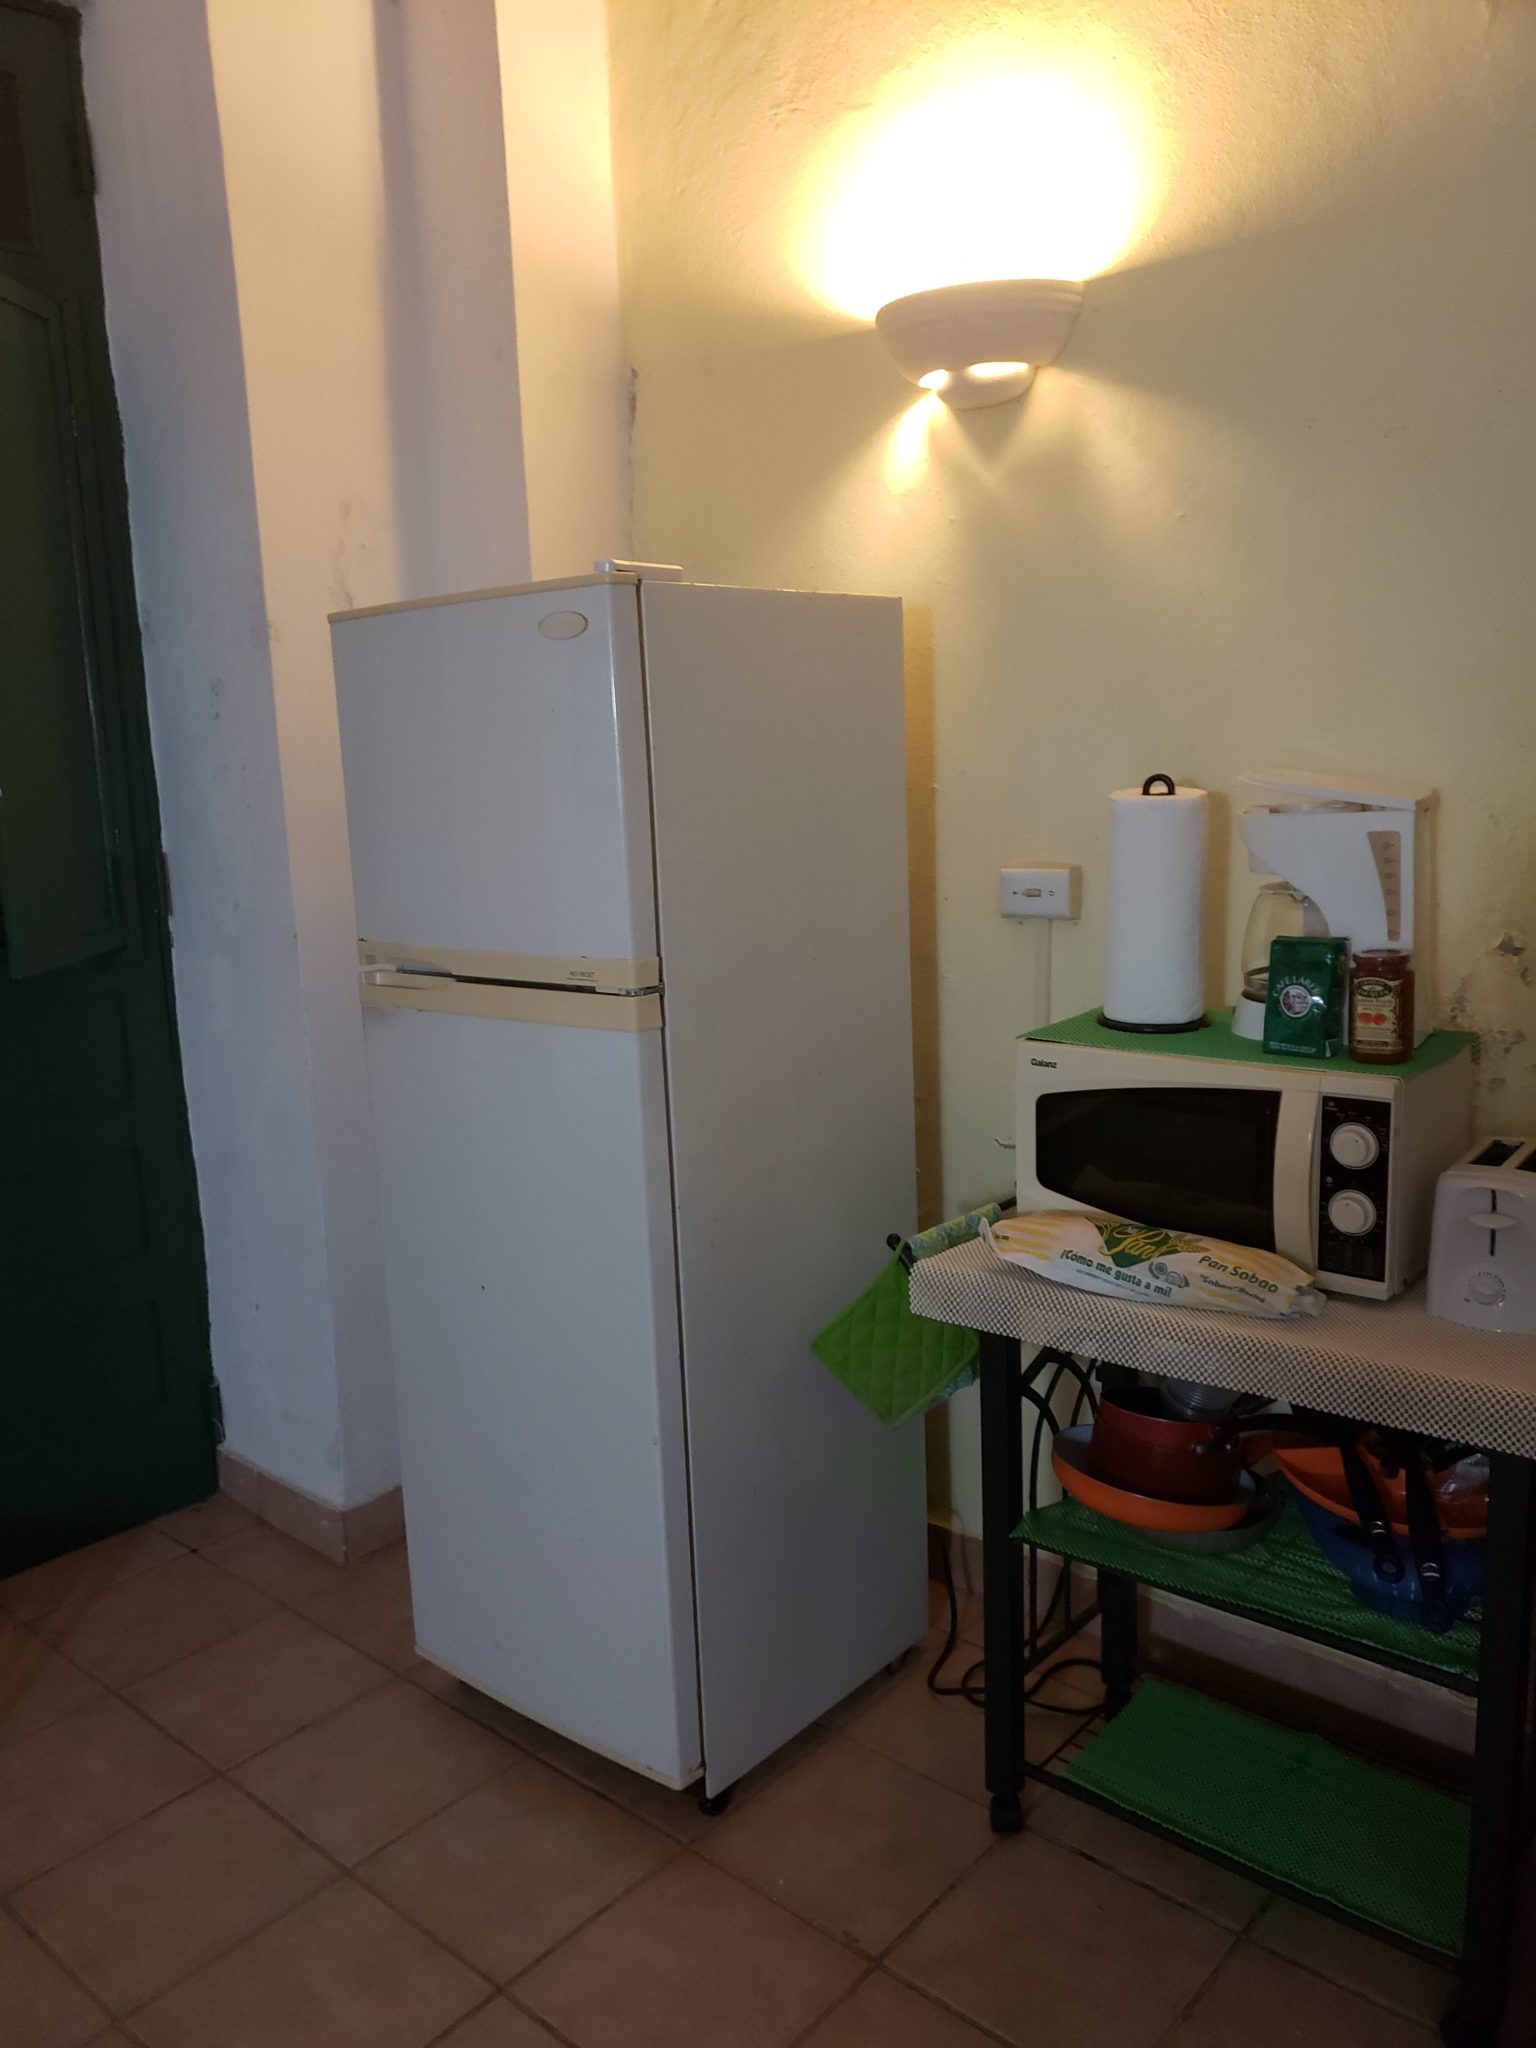 a refrigerator and microwave in a kitchen